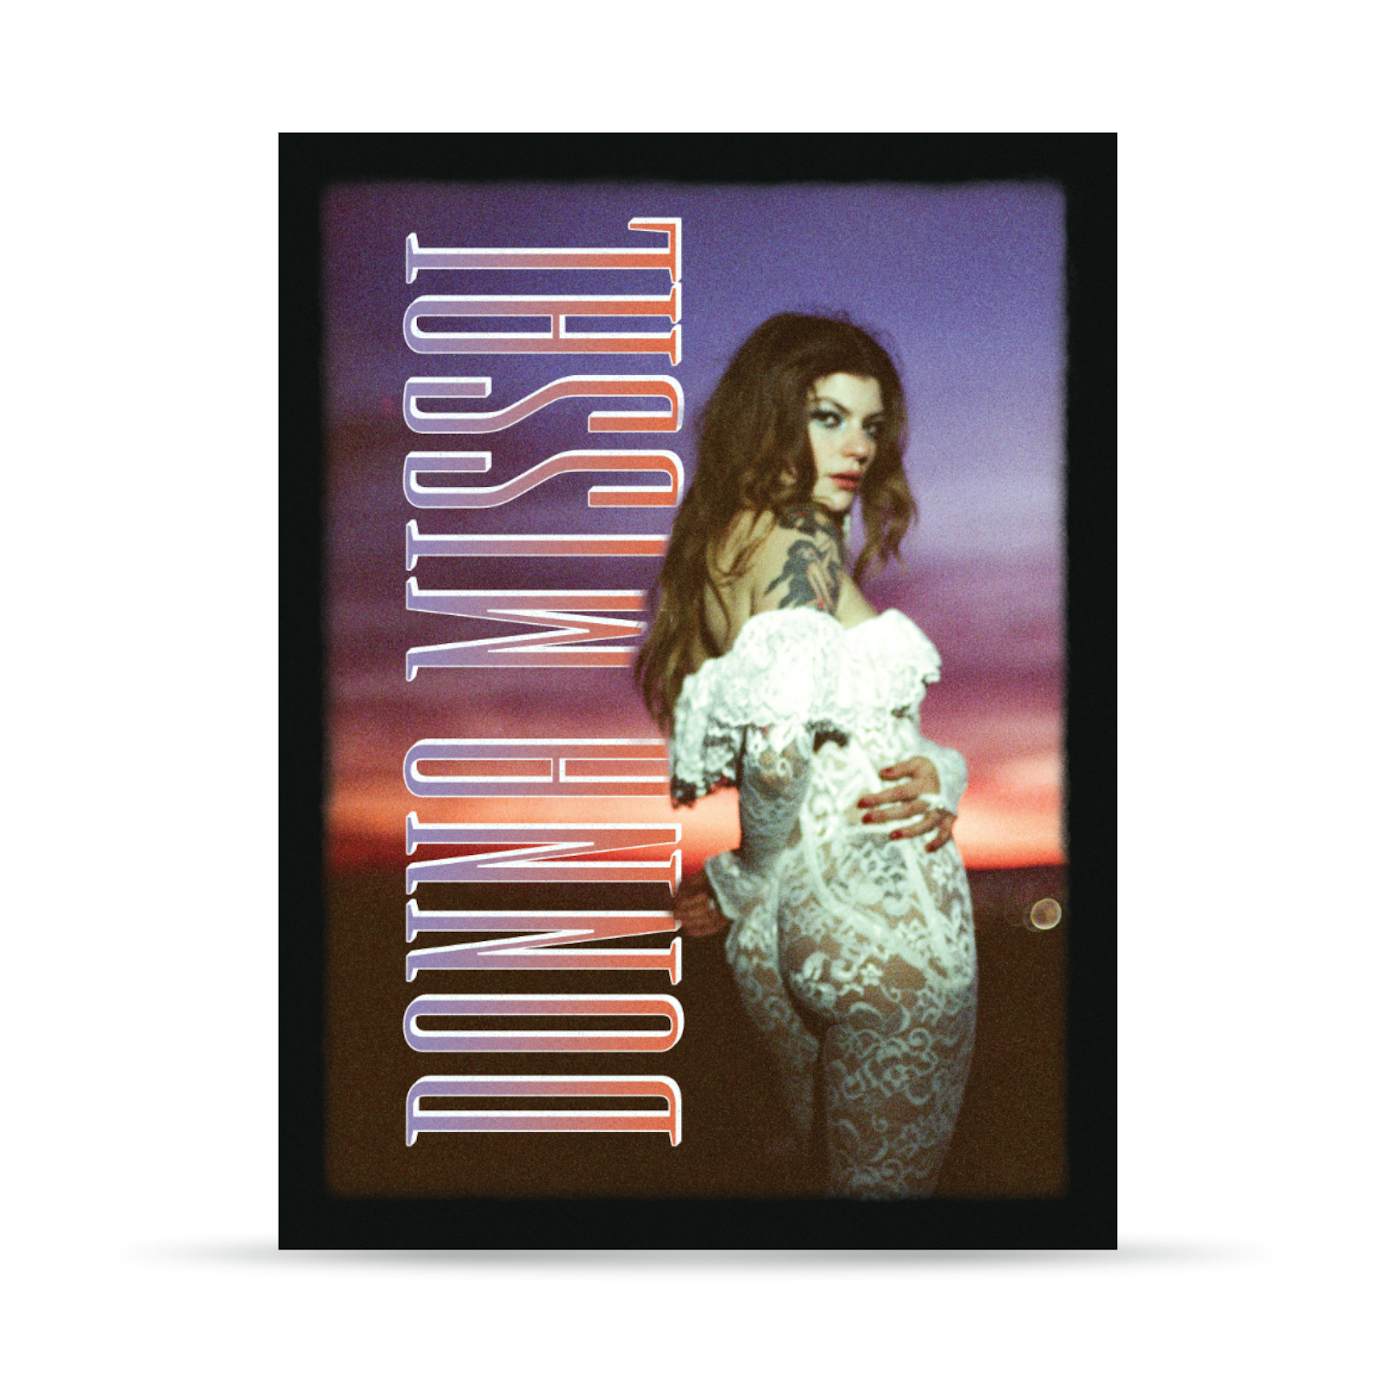 Donna Missal ‘Hurt By You’ Limited Edition Poster